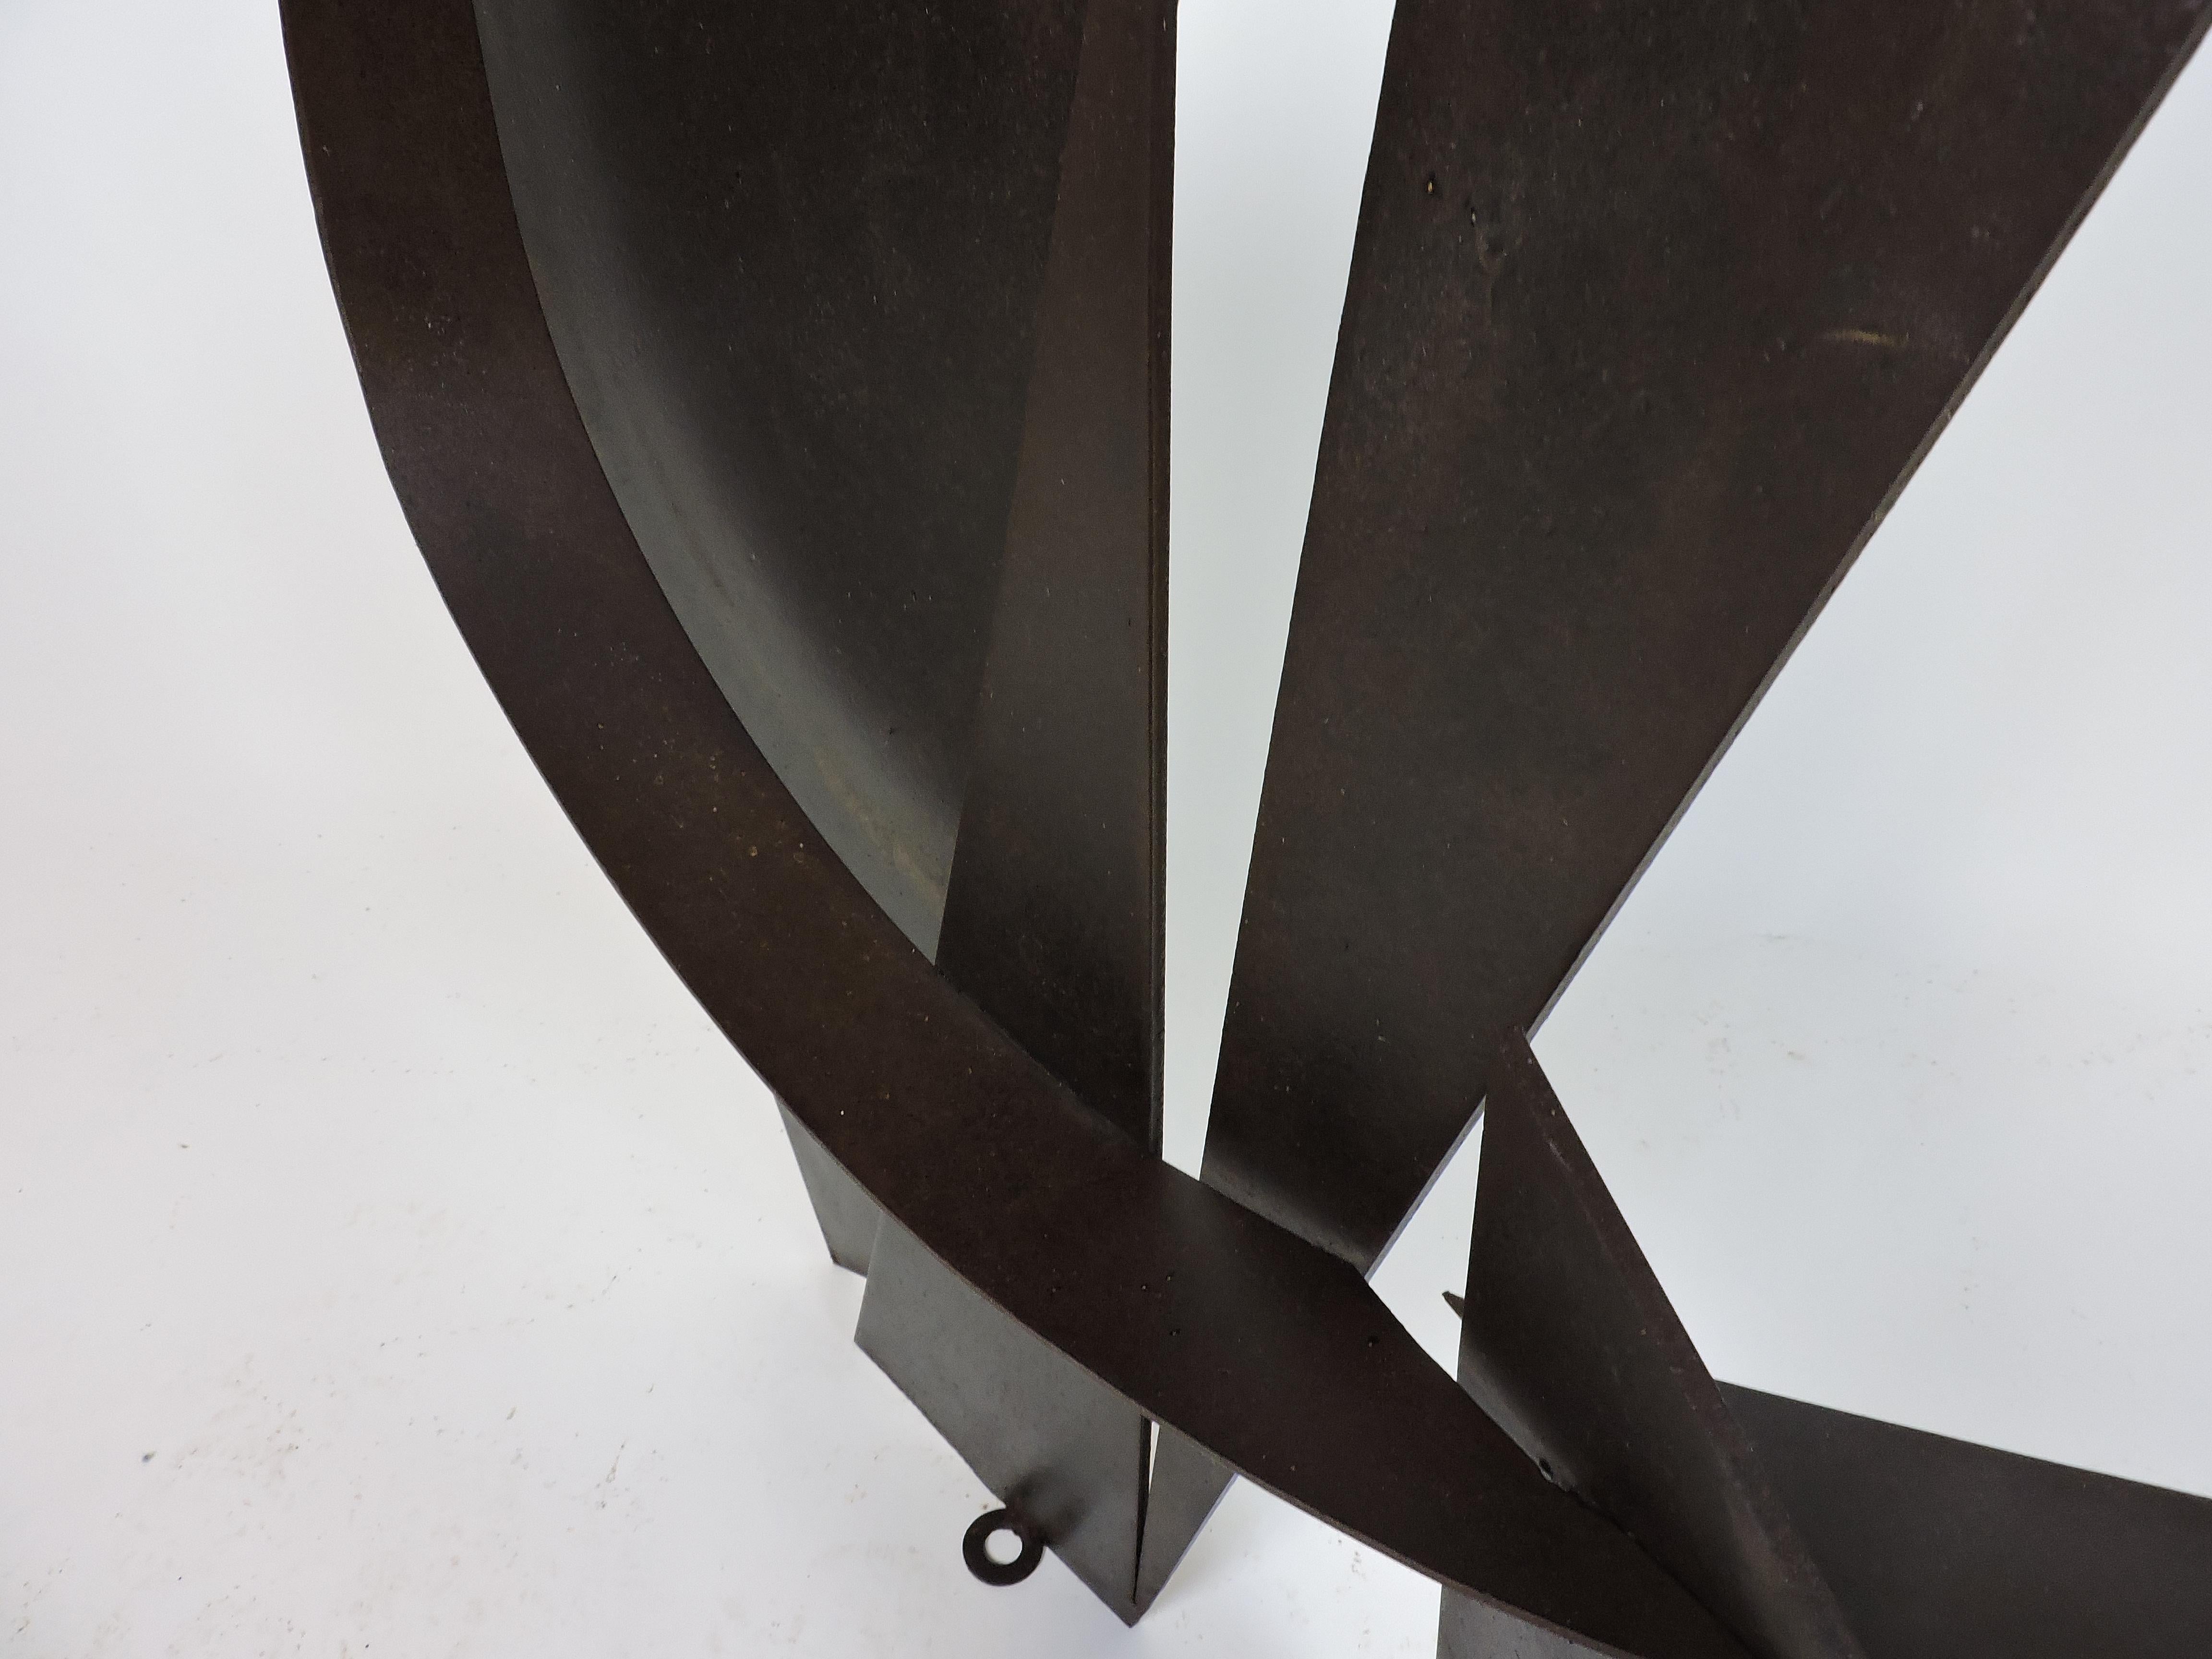 Late 20th Century Abstract Welded Geometric Steel Sculpture by David Tothero